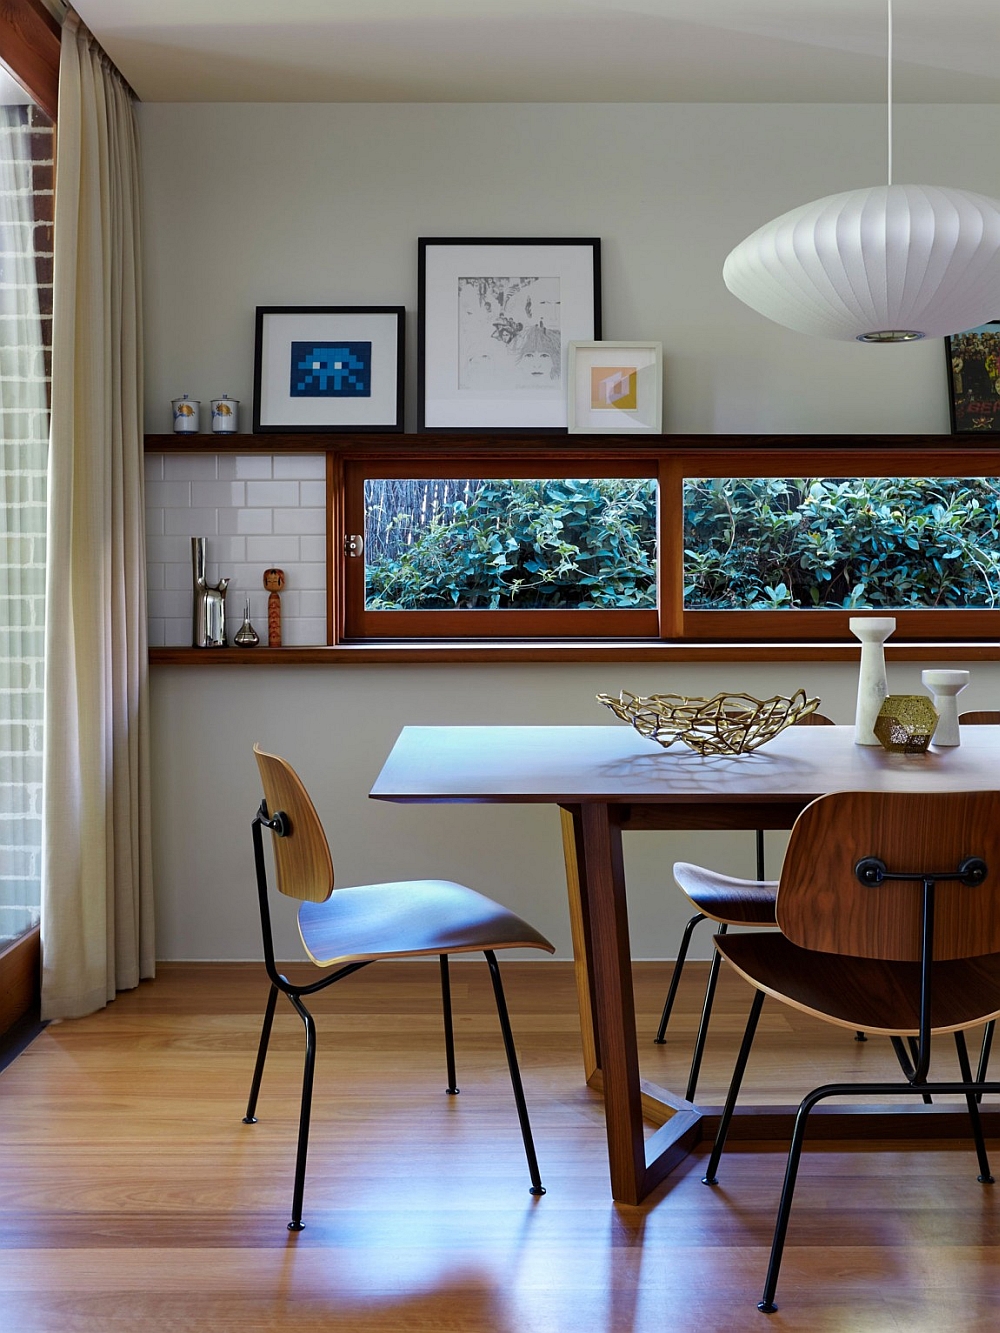 Narrow window in the dining room brings the garden charm indoors